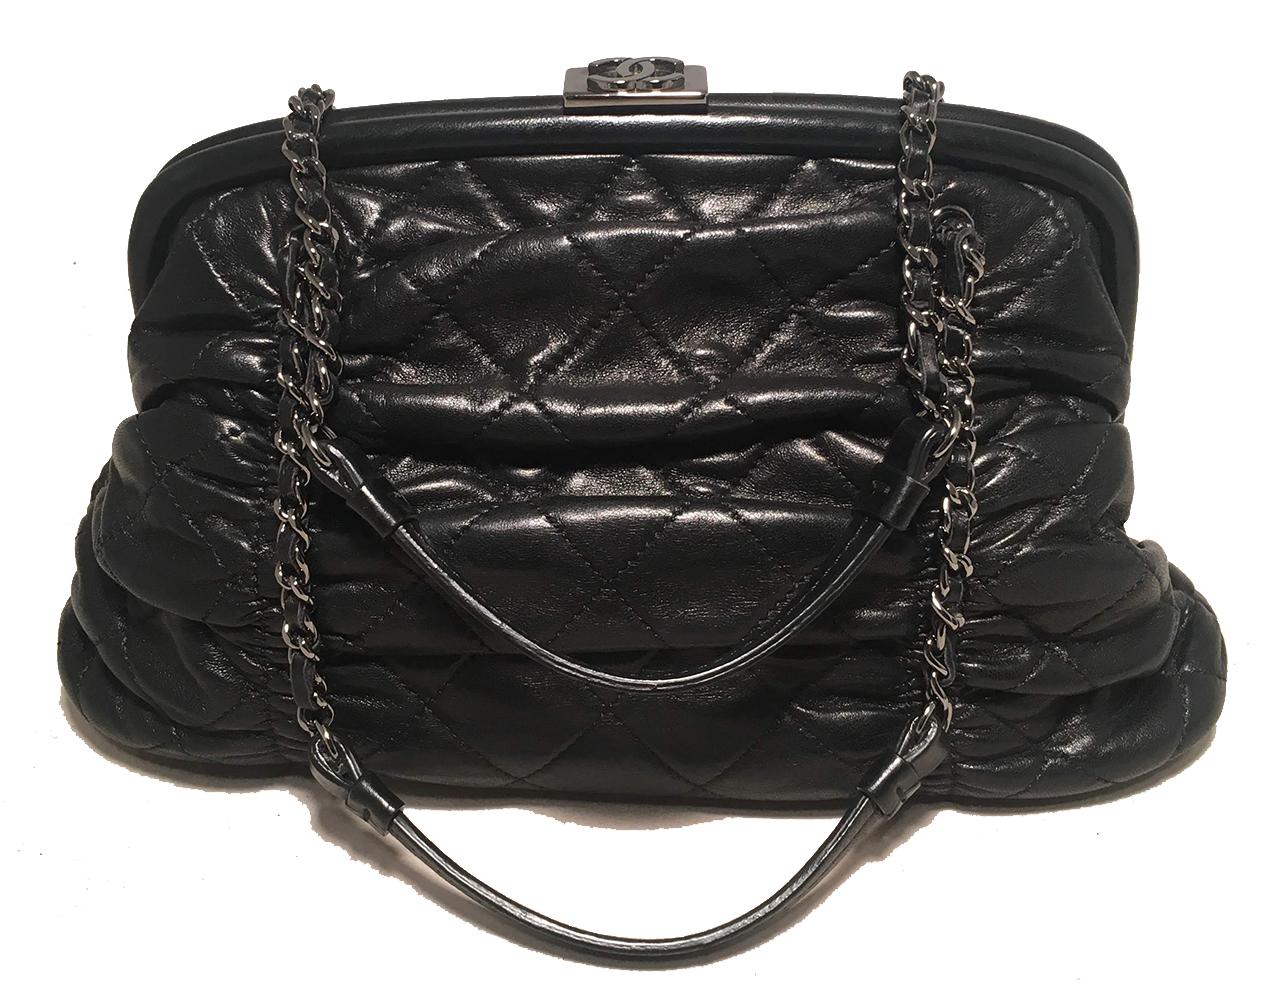 TIMELESS Chanel Black Quilted Leather Ruched Frame Handbag in excellent condition. Black quilted and ruched leather exterior trimmed with woven chain and leather double handles and silver hardware. Top lift closure opens to a grey silk lined